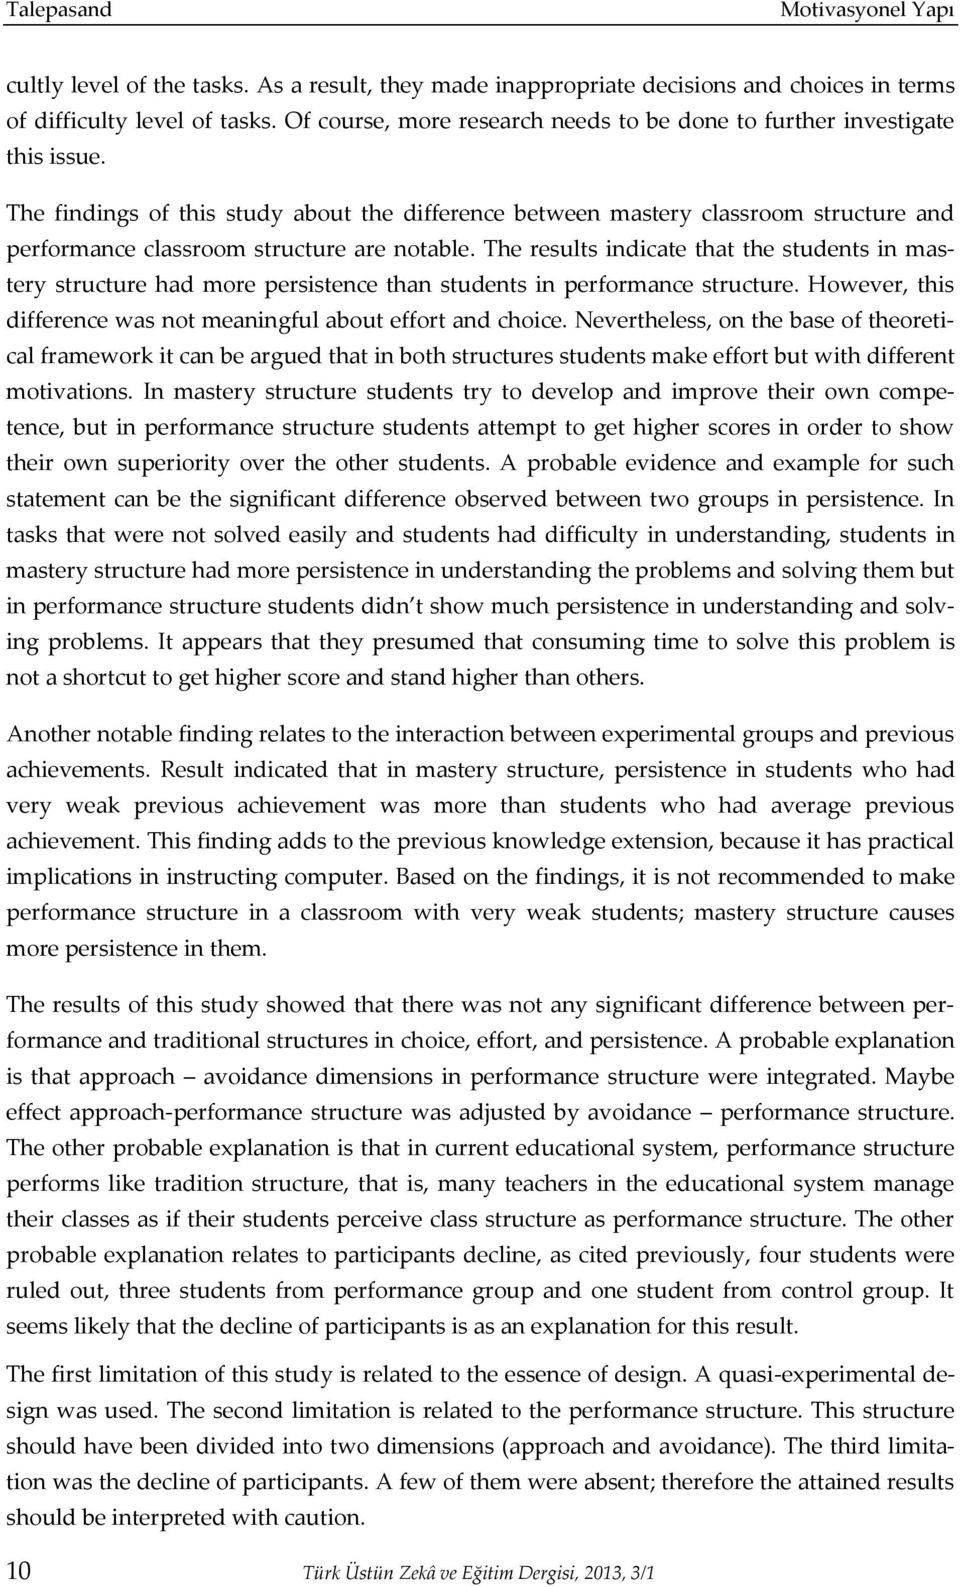 The findings of this study about the difference between mastery classroom structure and performance classroom structure are notable.